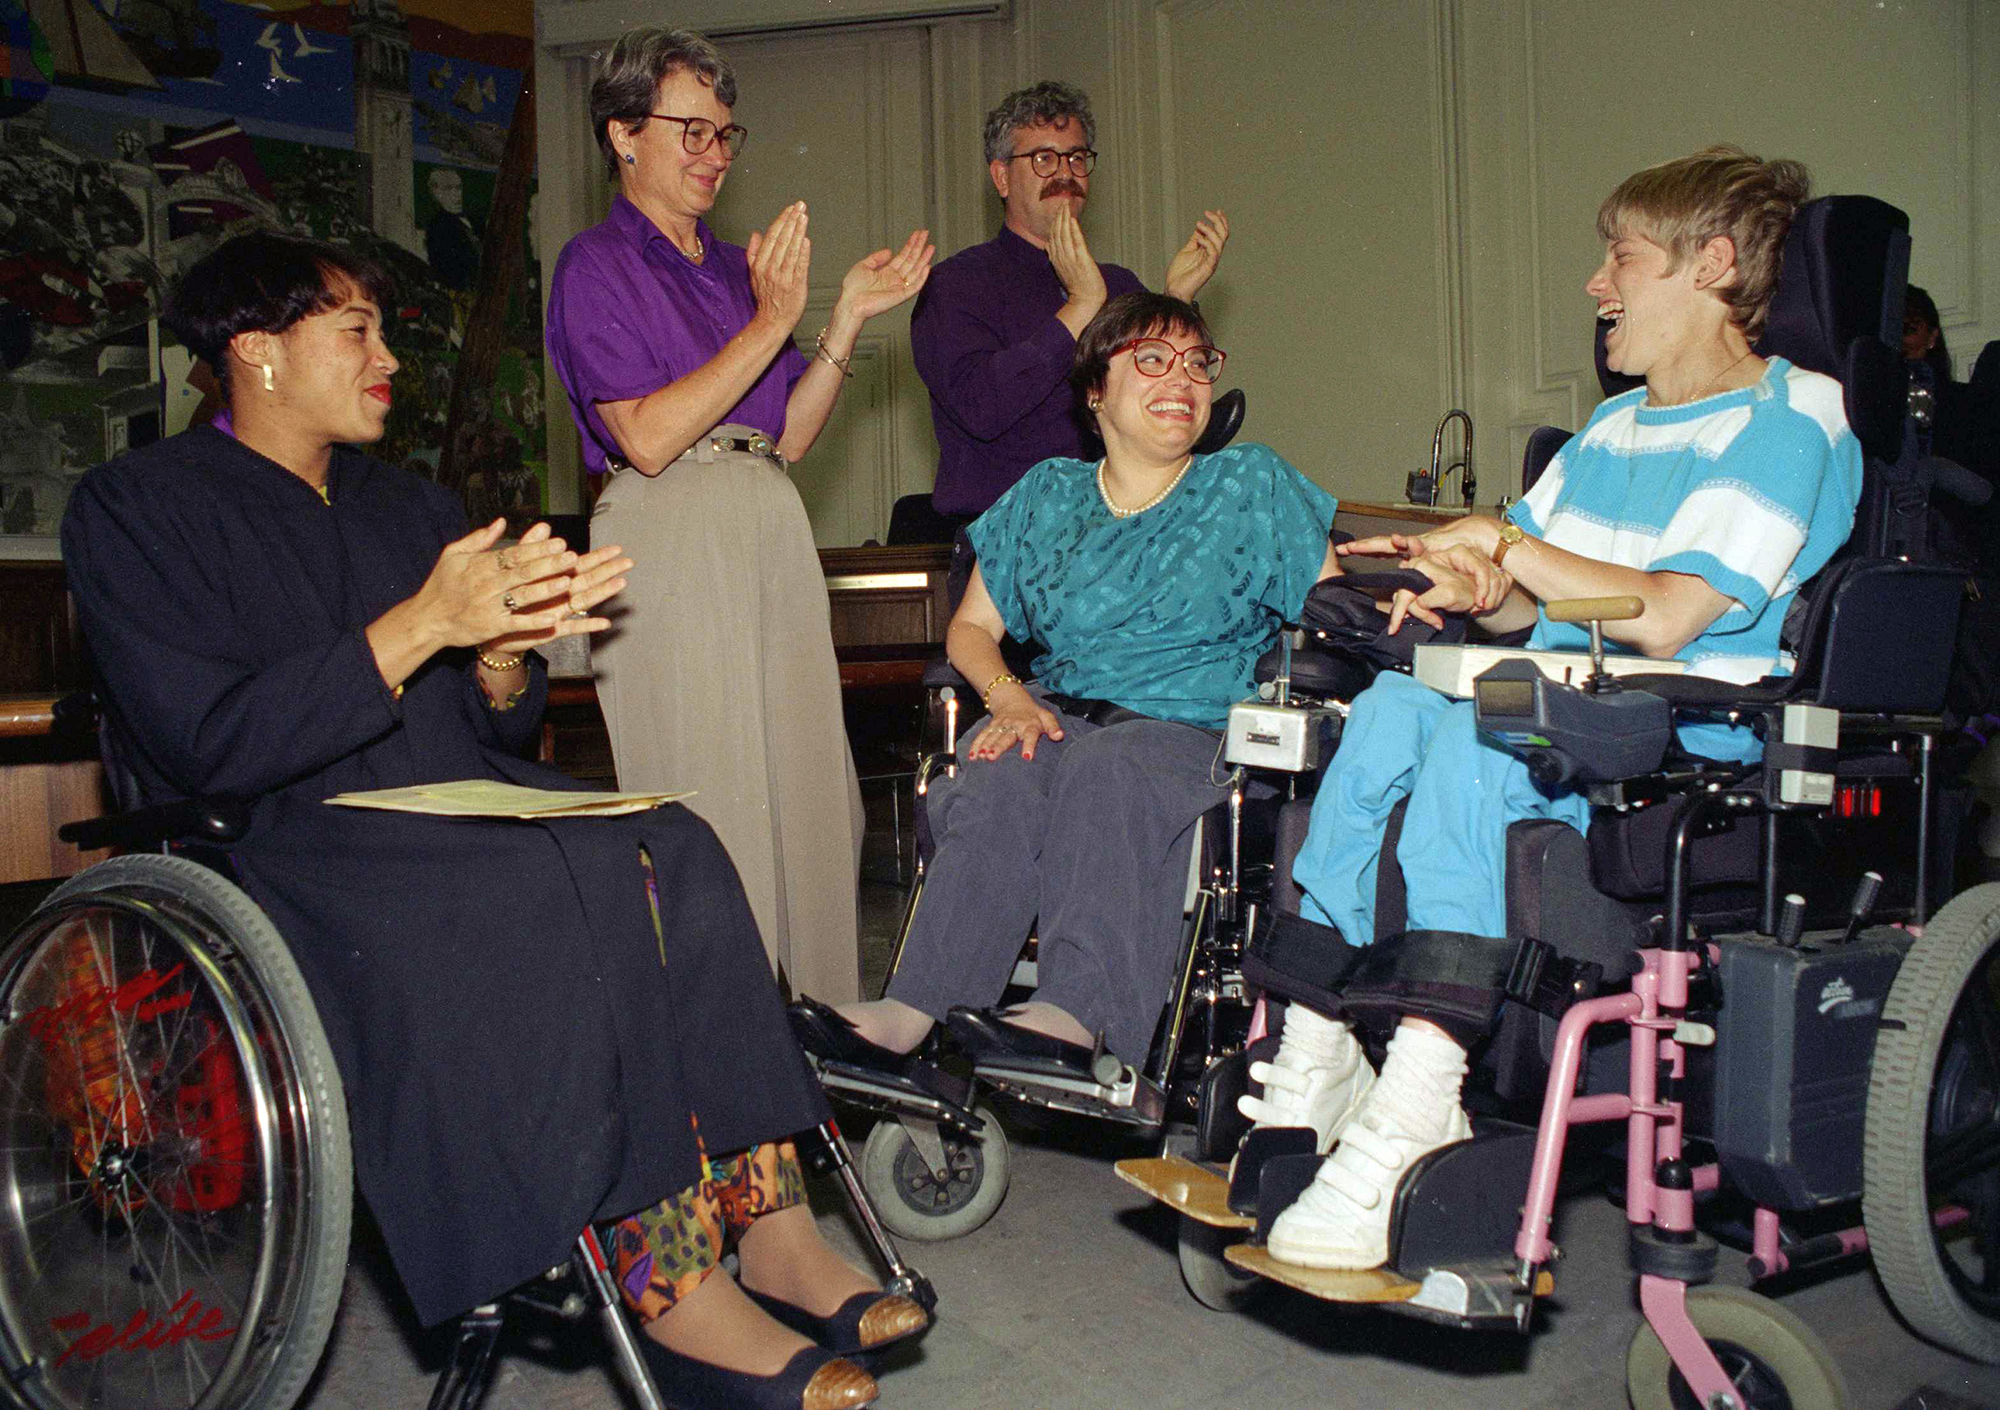 Judy Heumann is applauded during her swearing-in as U.S. Assistant Secretary for Special Education and Rehabilitative Service in 1993. 